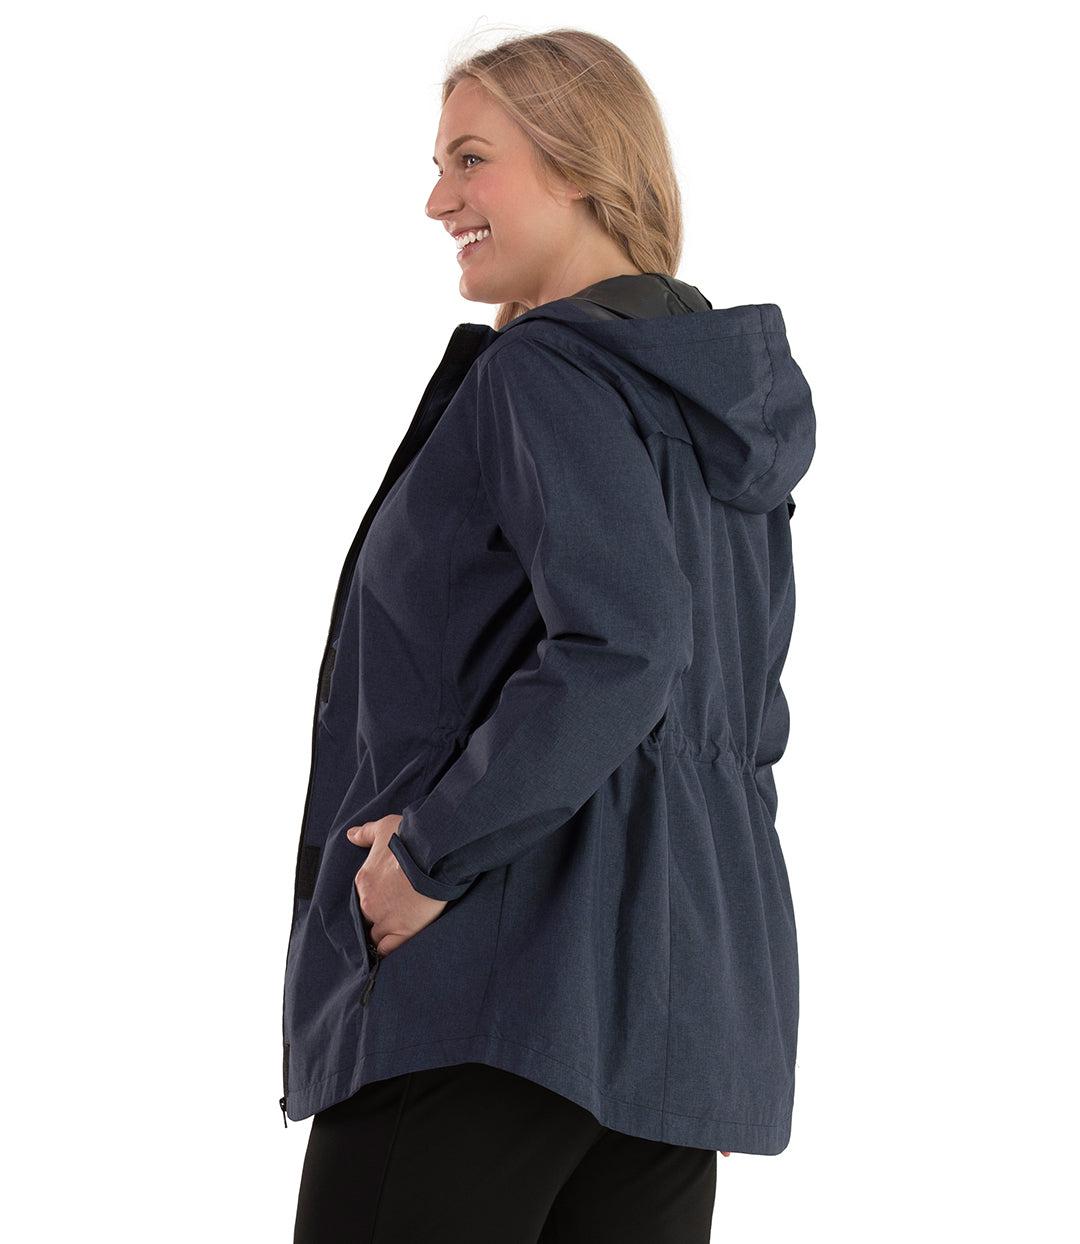 Plus size woman, side view, facing left wearing a JunoActive plus size Waterproof Breathable Wind & Rain Jacket in navy blue. The jacket has a hood, double front closure and side pockets. The length of the plus size jacket hits just below the hips.